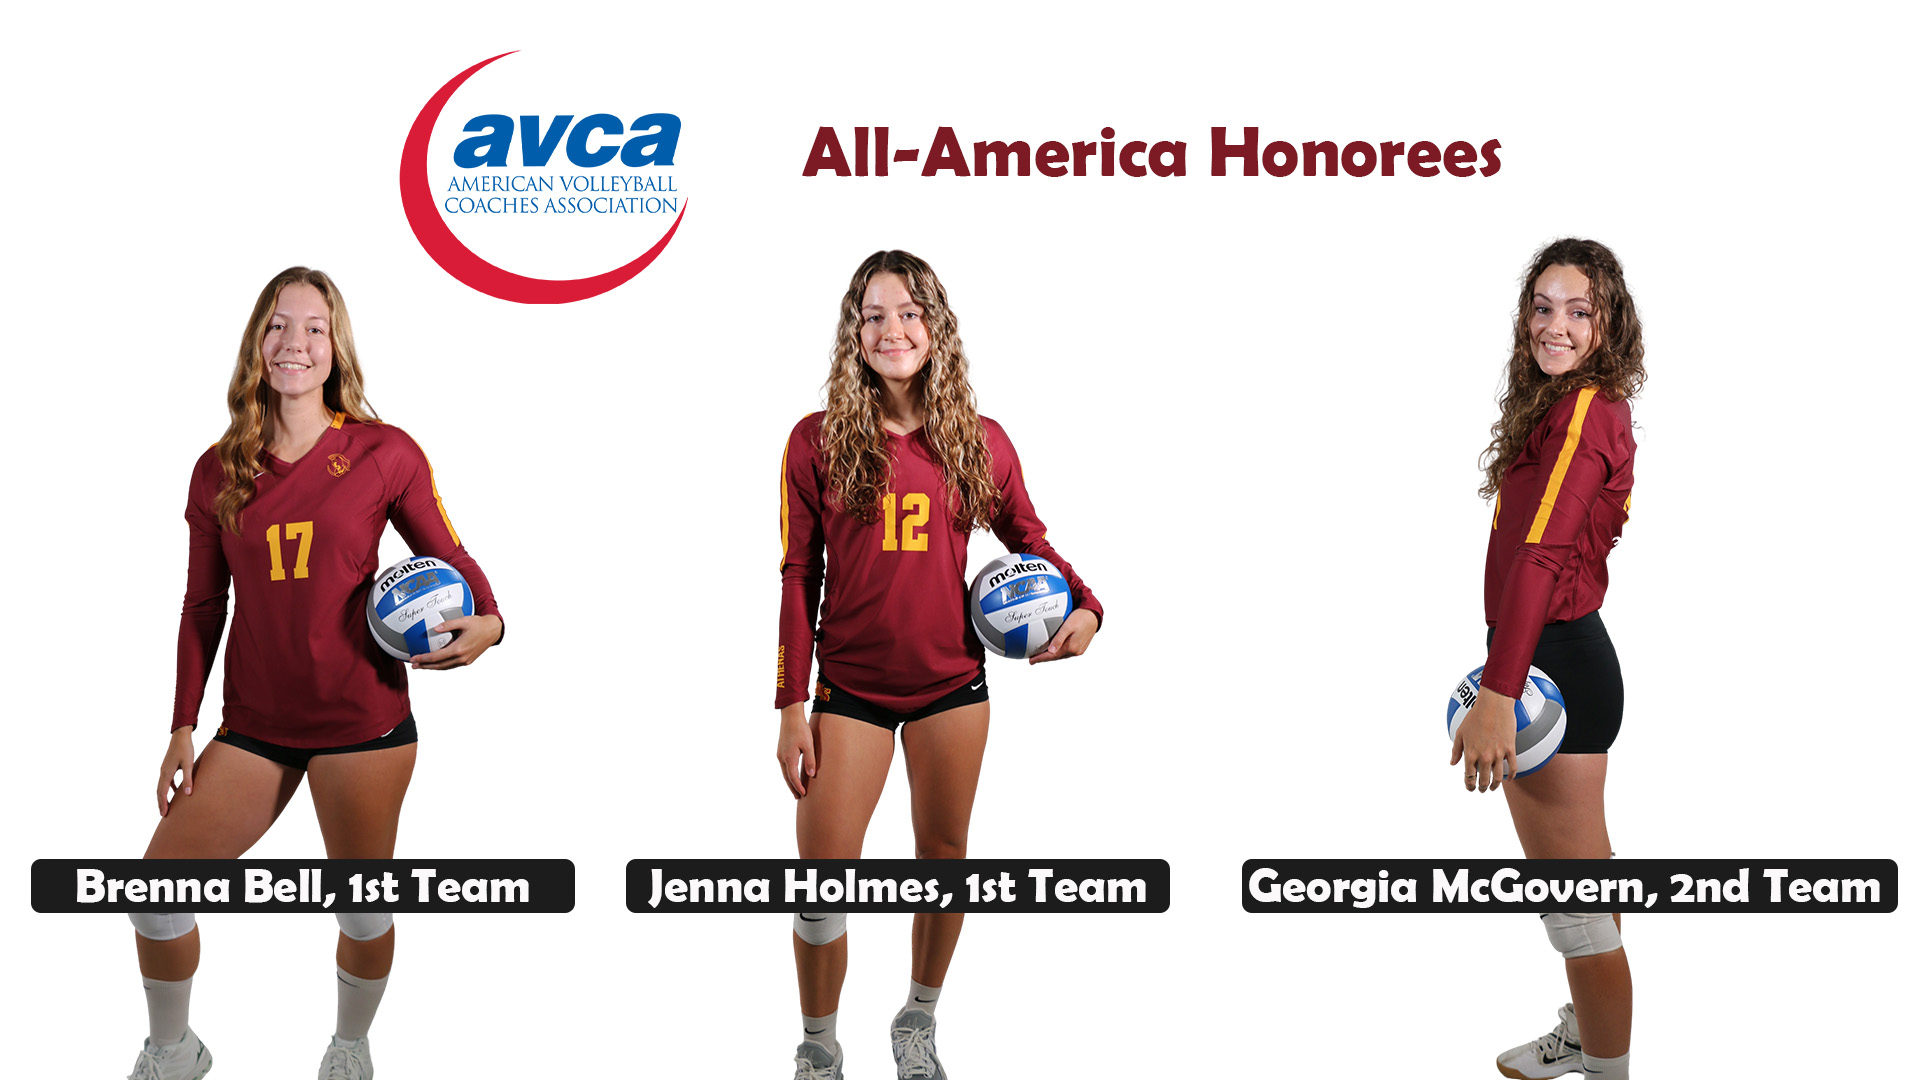 Posed shots of Brenna Bell, Jenna Holmes and Georgia McGovern with the AVCA logo